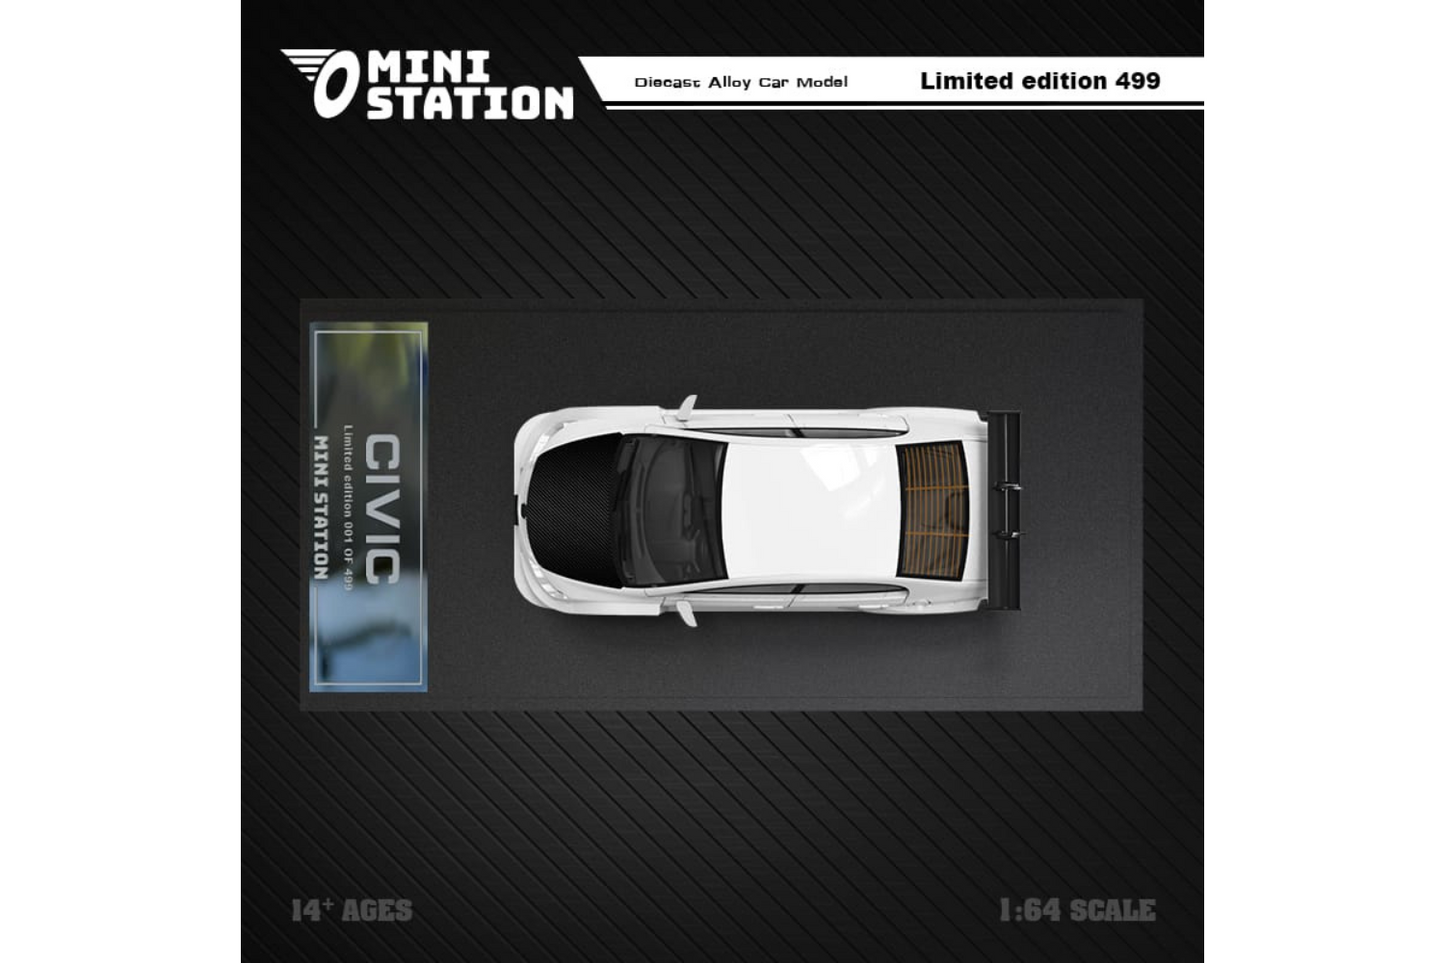 Mini Station 1/64 Honda Civic (FD2) Widebody in White with Carbon Hood